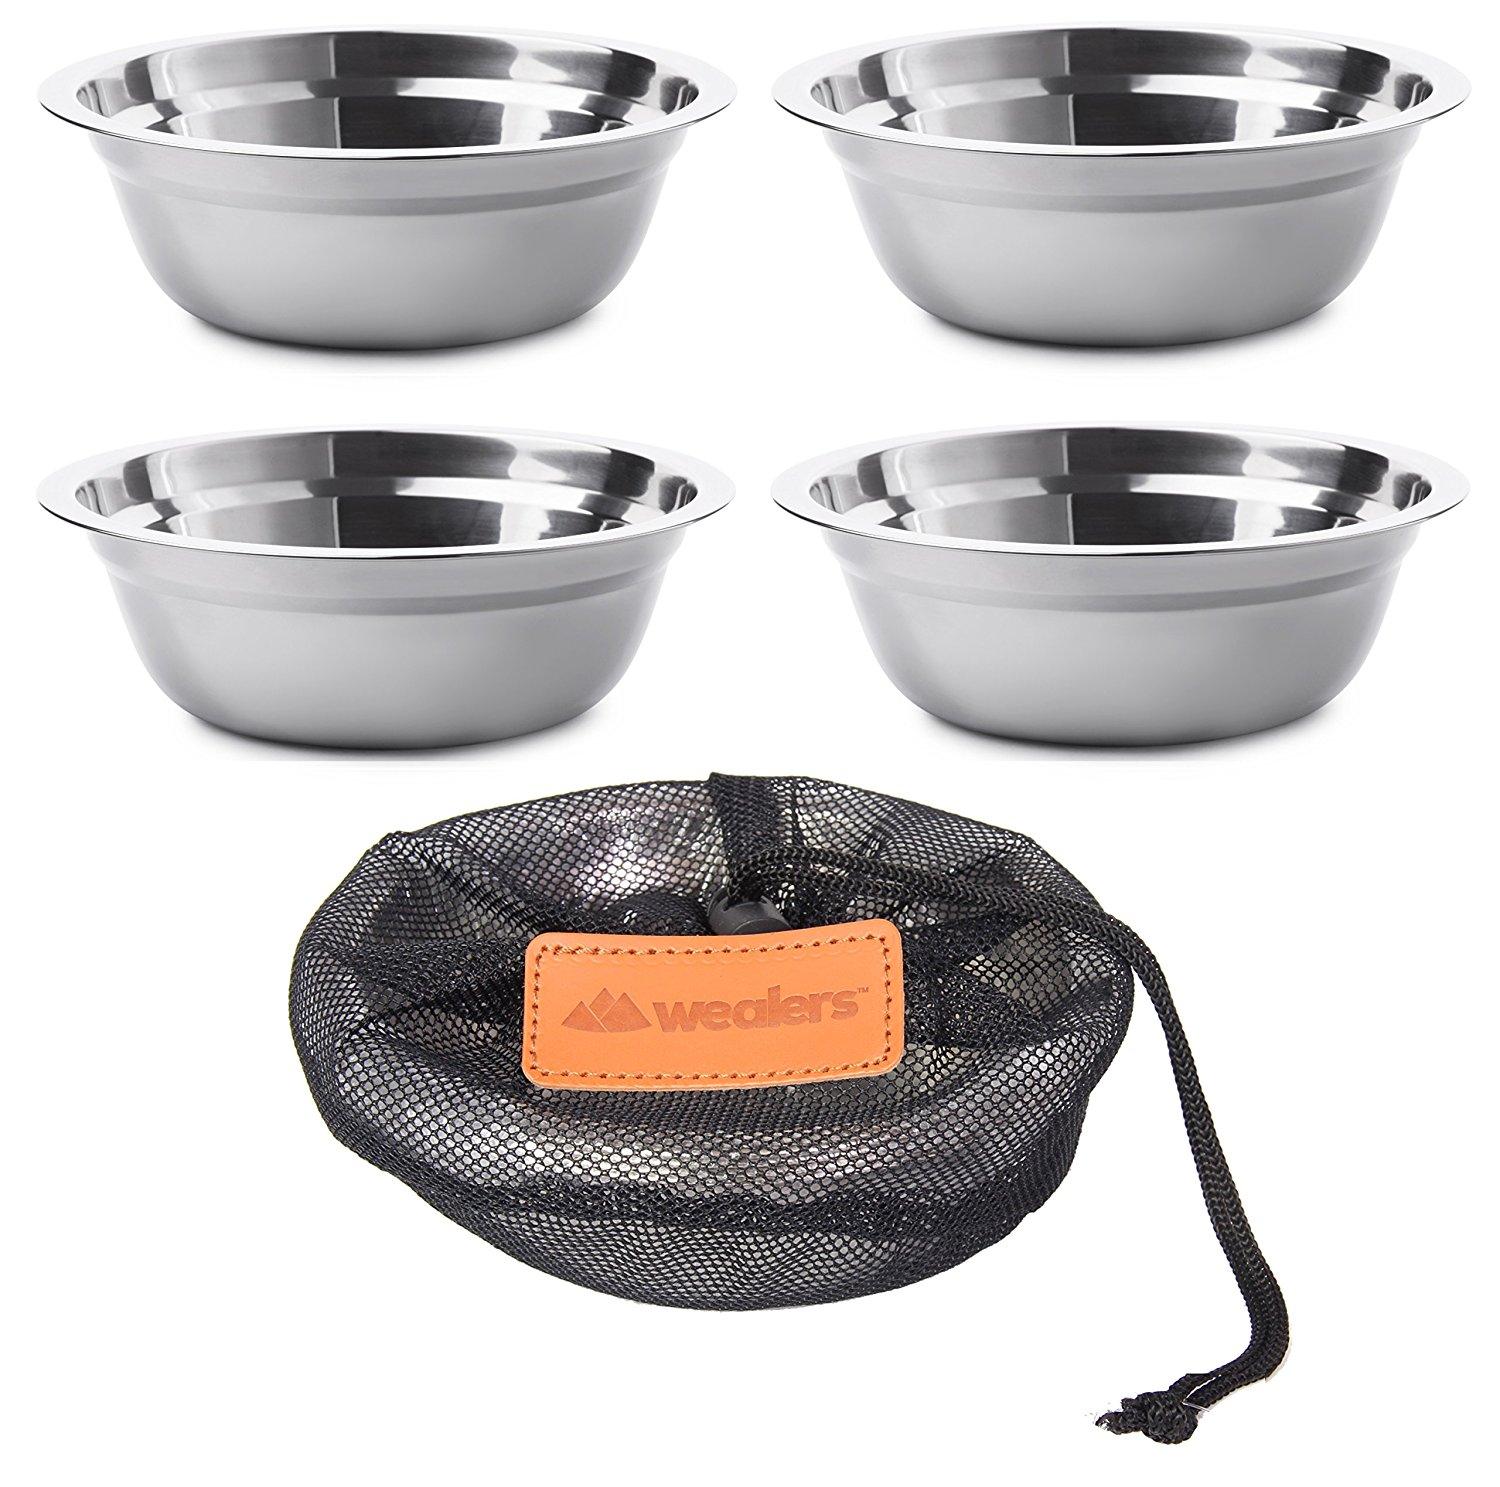 wealers 6 inch stainless steel bowl set